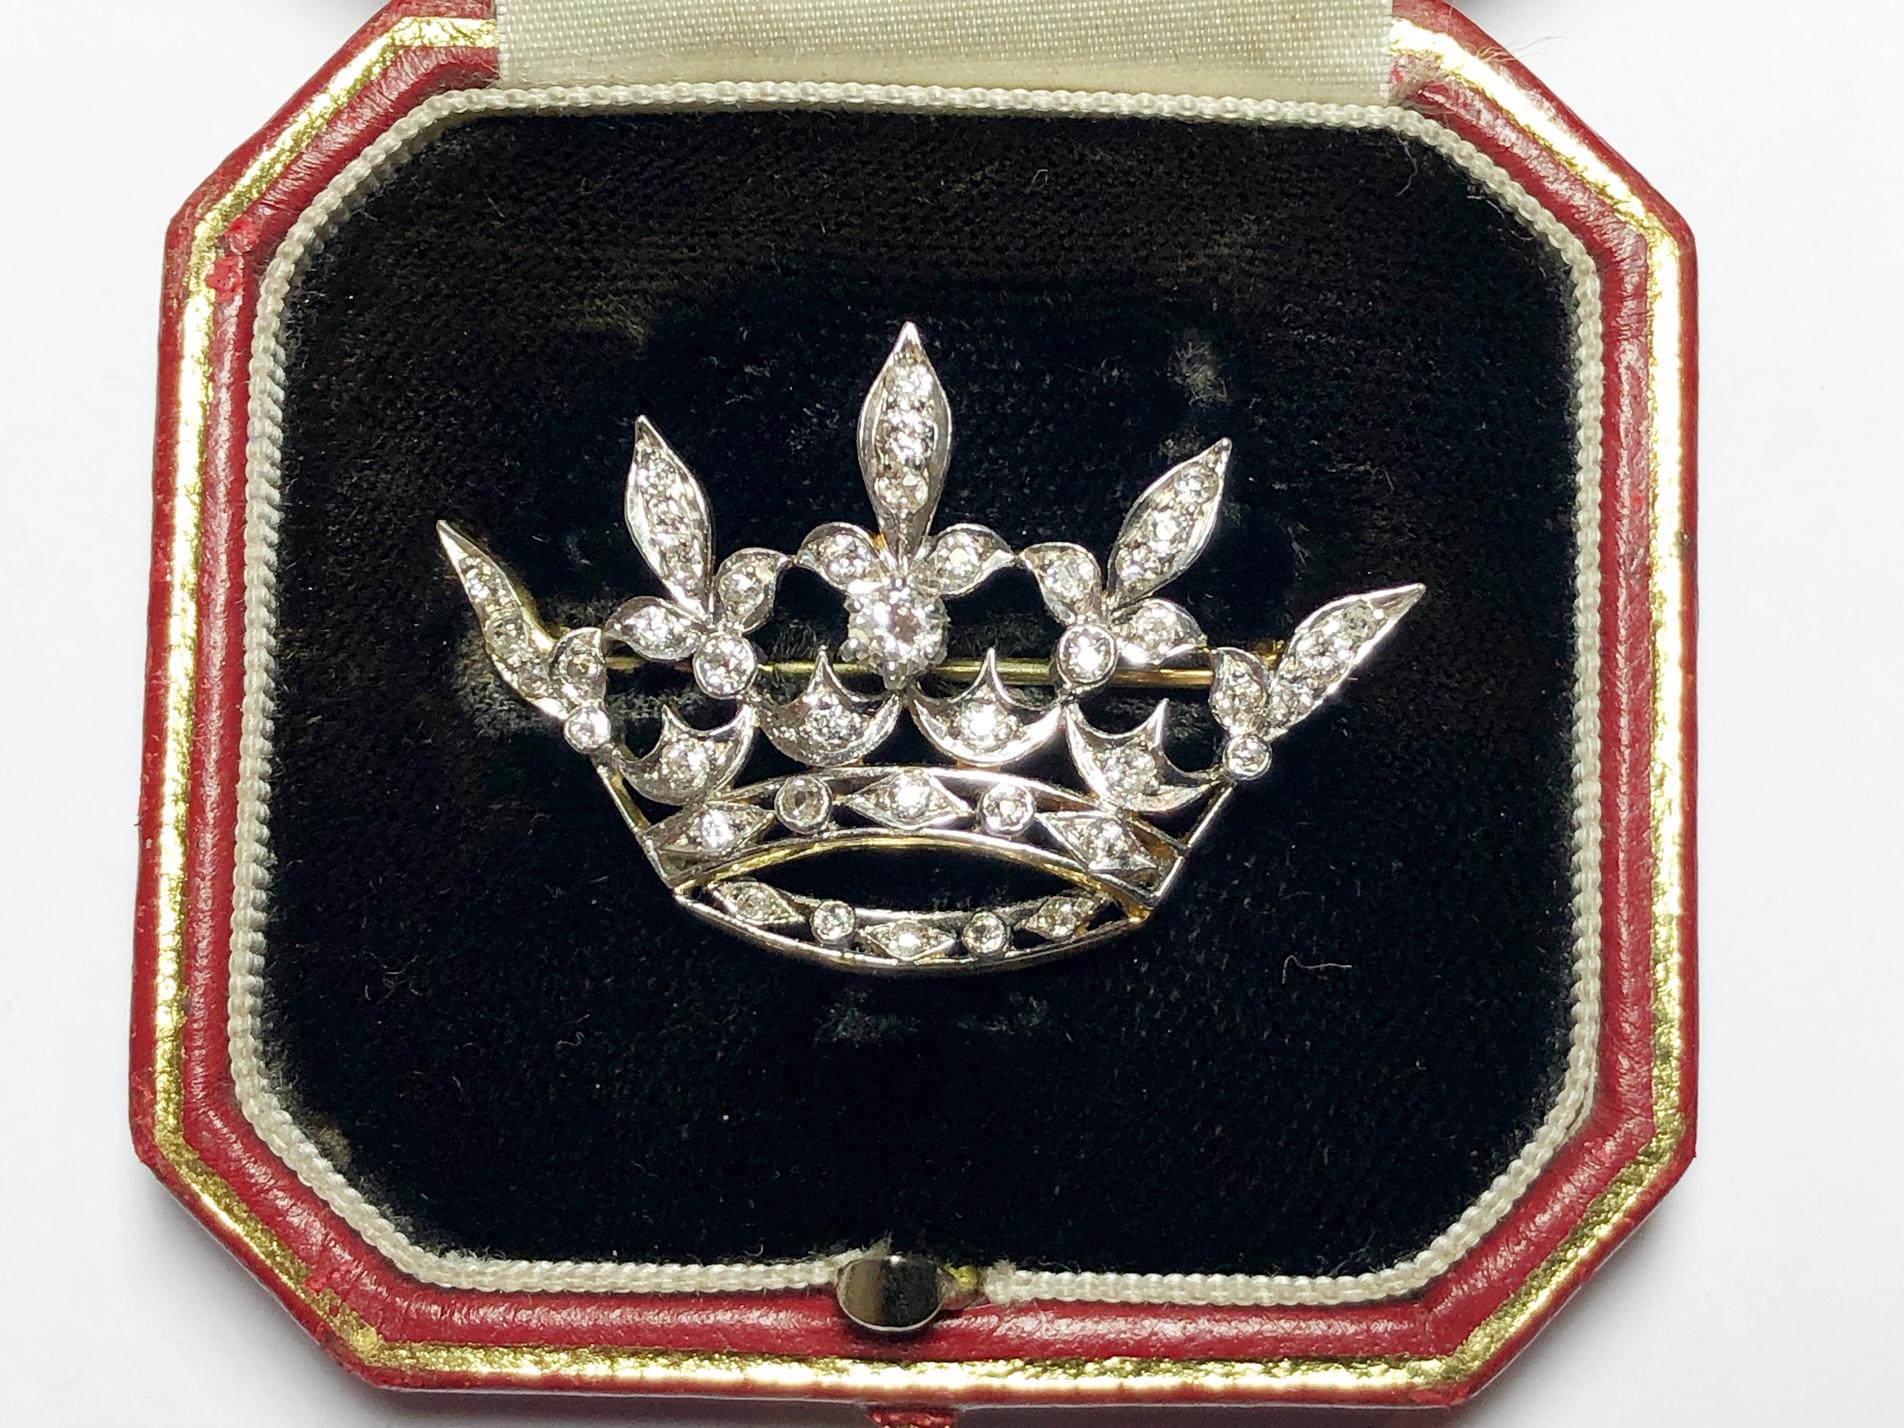 Edwardian Antique Diamond, Platinum And Gold Crown Brooch, Circa 1915 For Sale